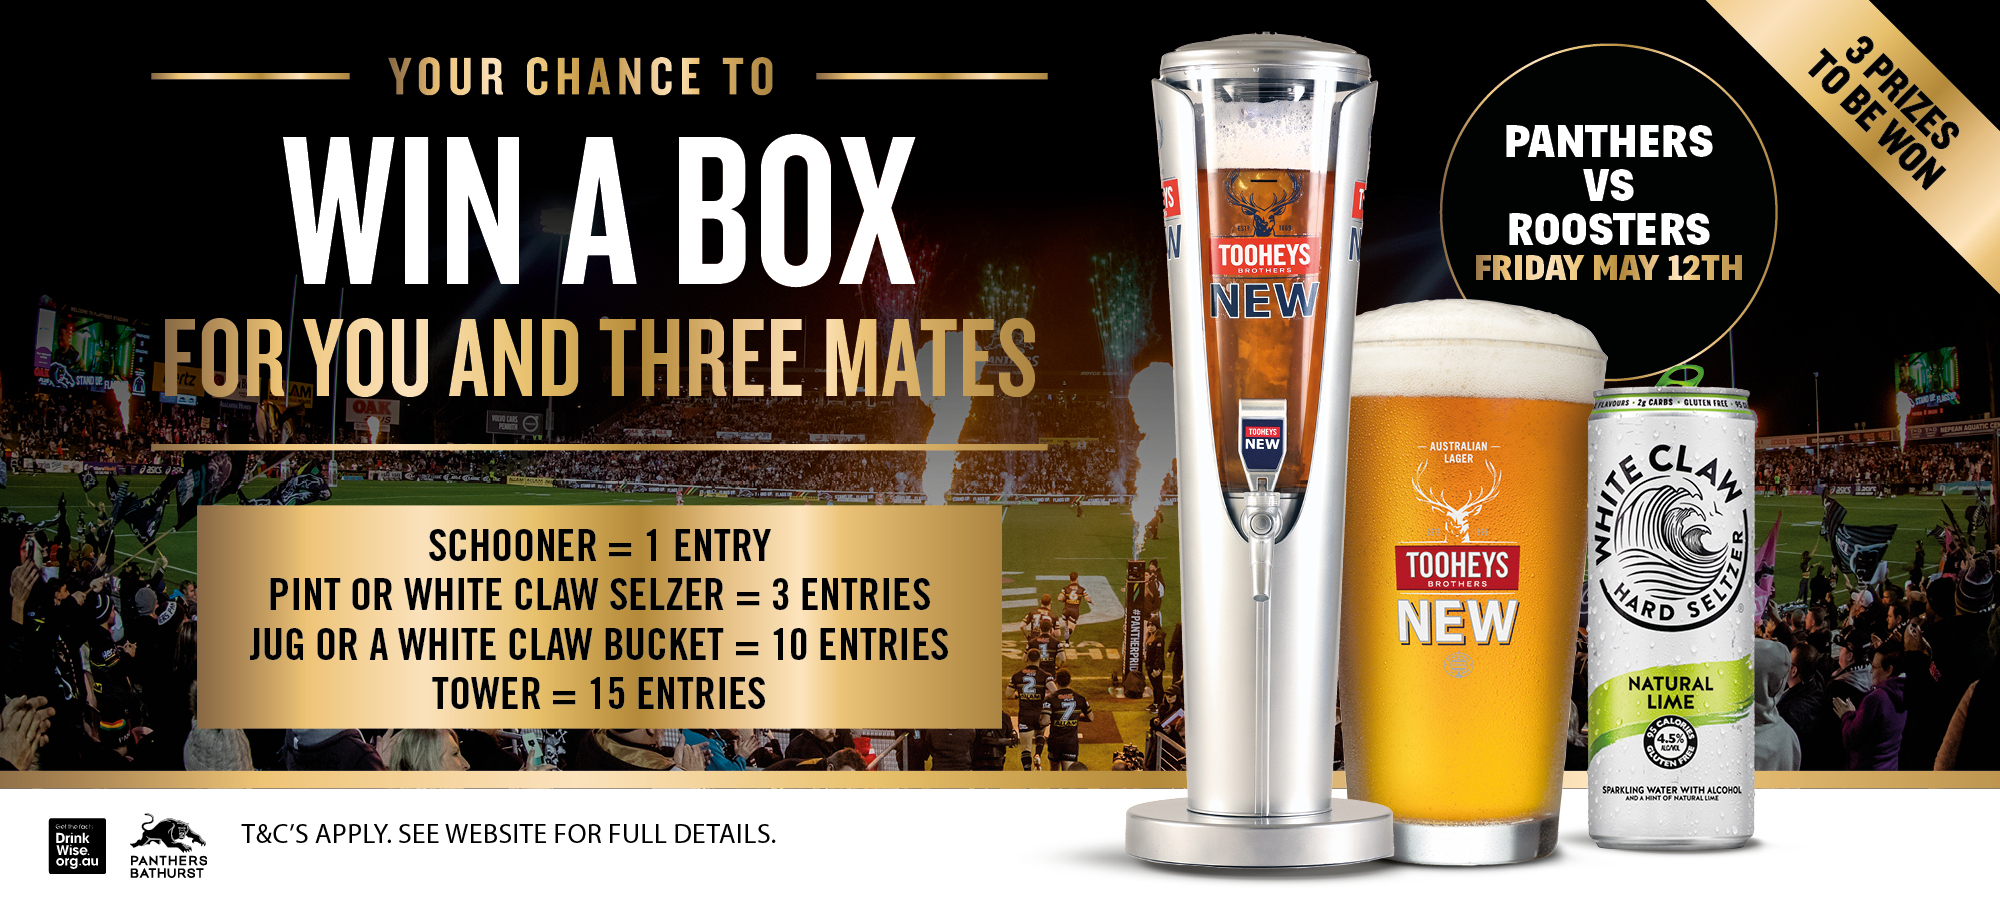 Win a Box to Panthers vs Roosters